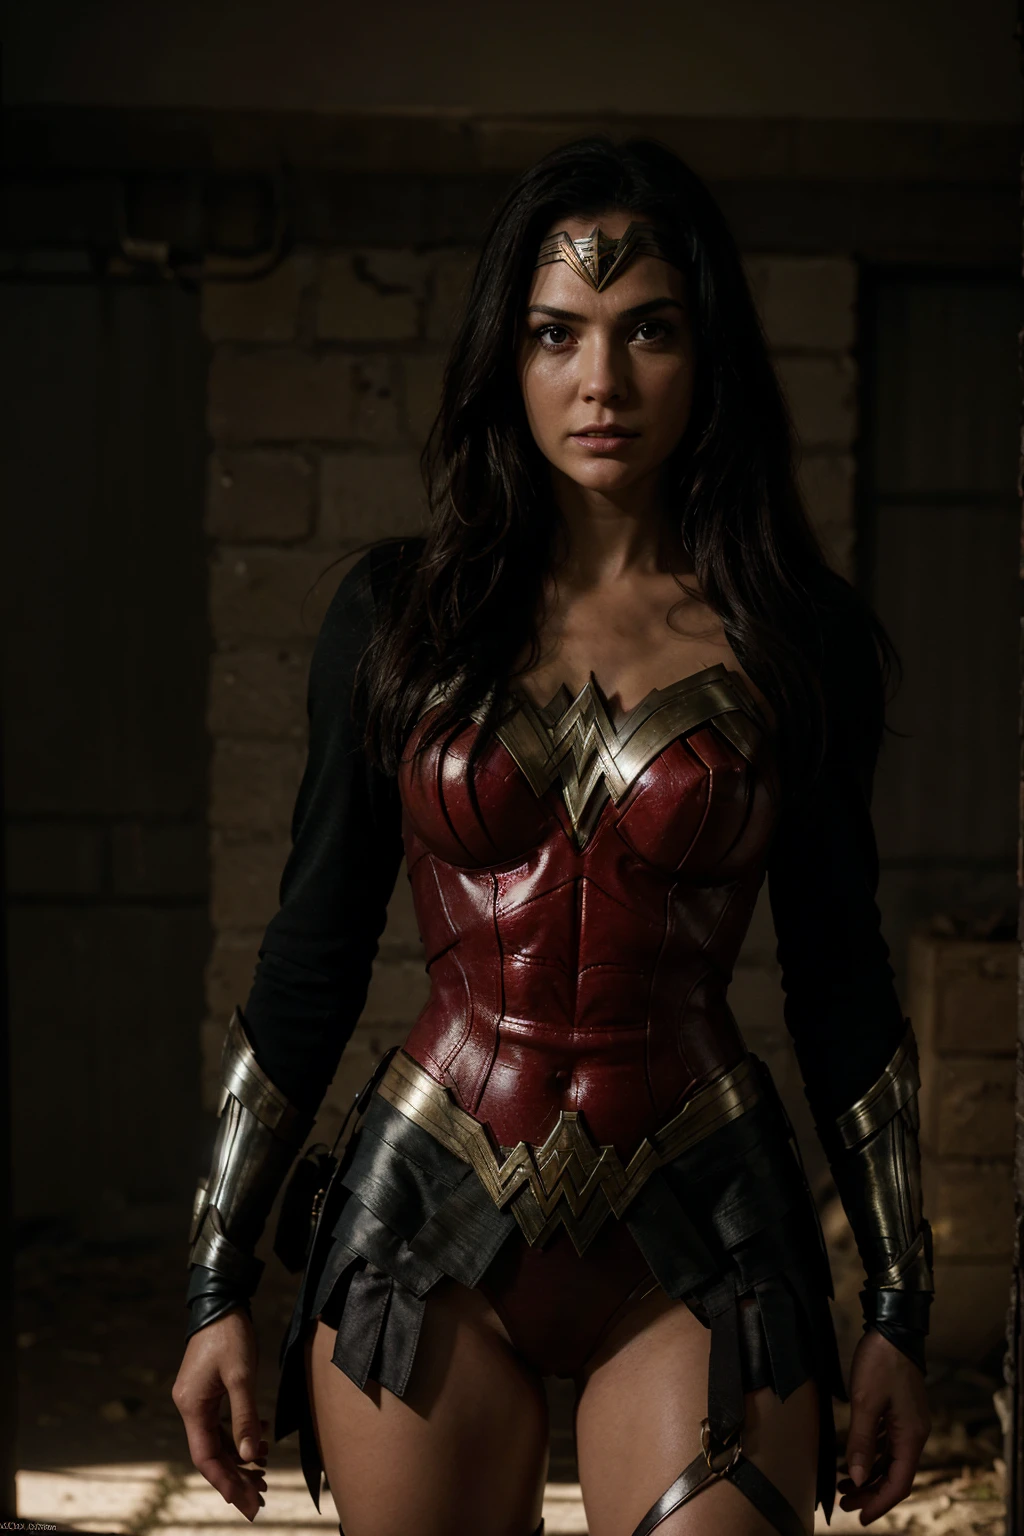 Wonder Woman is standing in a dark and mysterious environment. The scene is lit by a single light source, creating a sense of tension and suspense. The character is wearing a suit and tie, and their face is obscured by shadows. The image is rendered in high detail, with realistic textures and materials. The overall effect is a visually stunning and thought-provoking image that is sure to keep viewers engaged.
